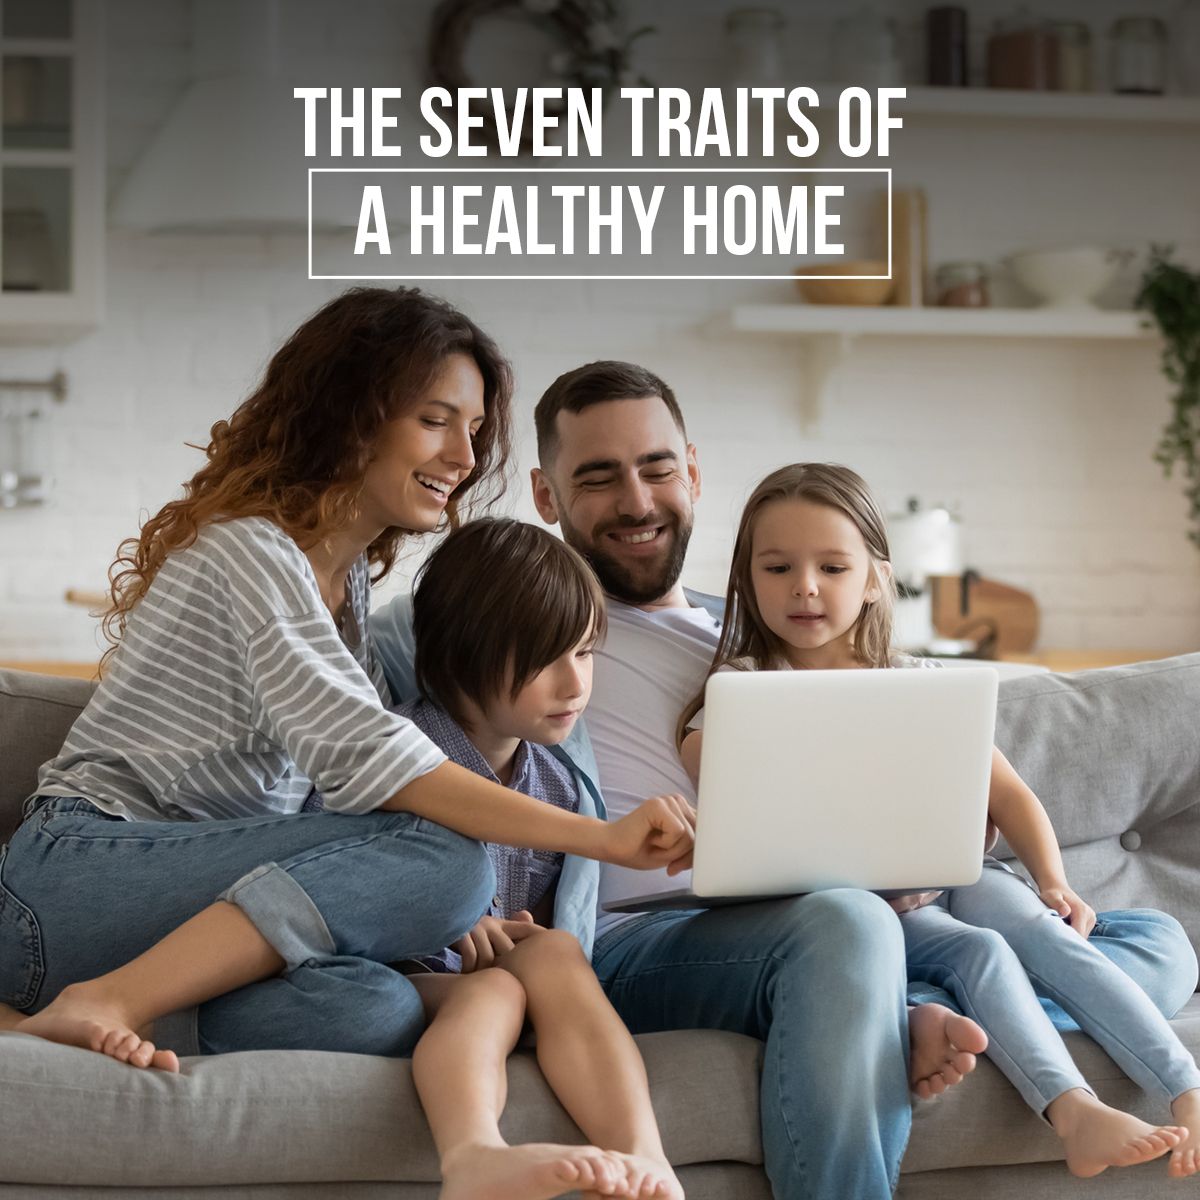 The Seven Traits of a Healthy Home